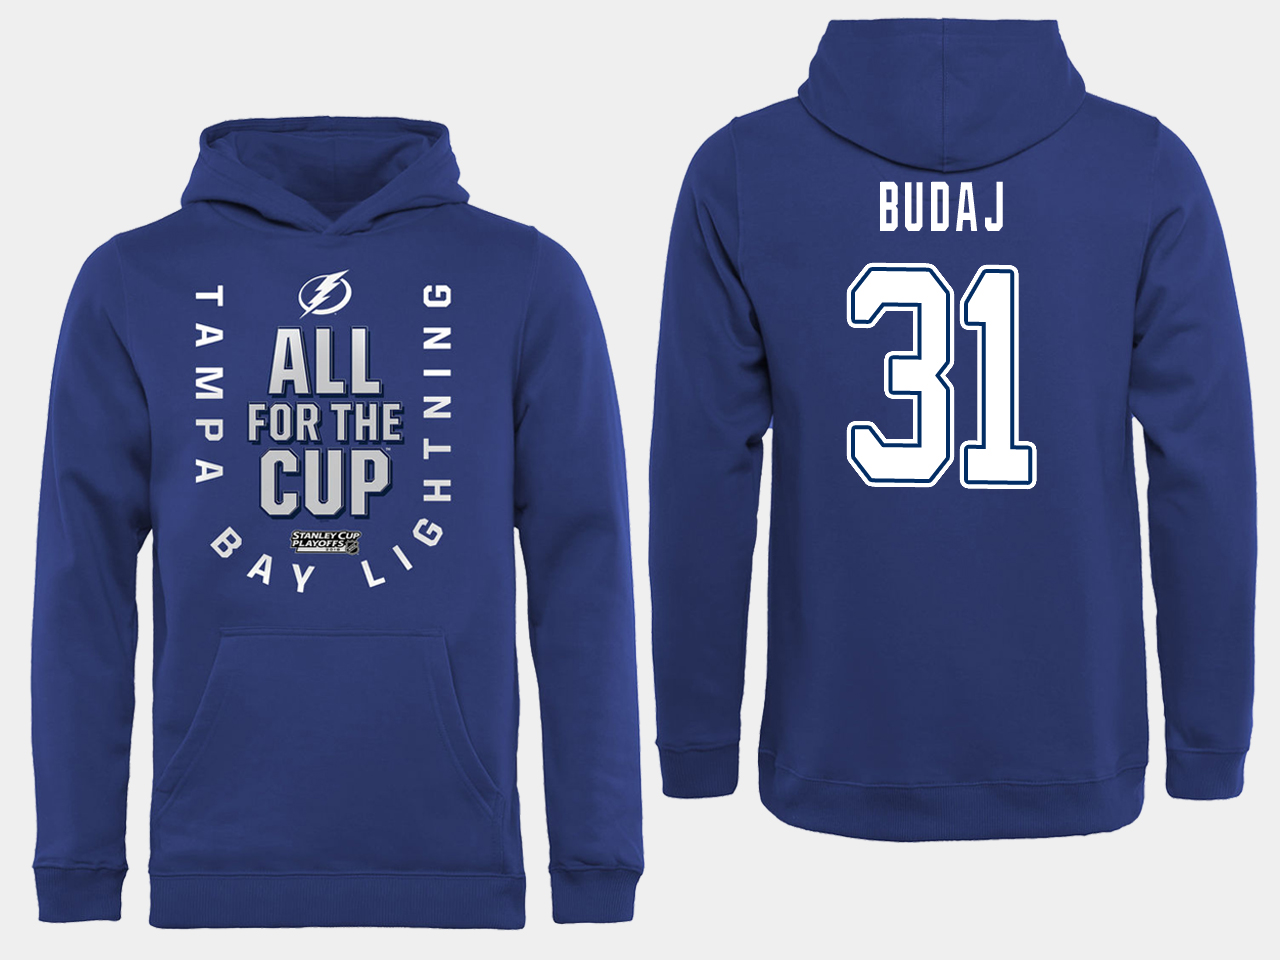 NHL Men adidas Tampa Bay Lightning #31 Budaj blue All for the Cup Hoodie